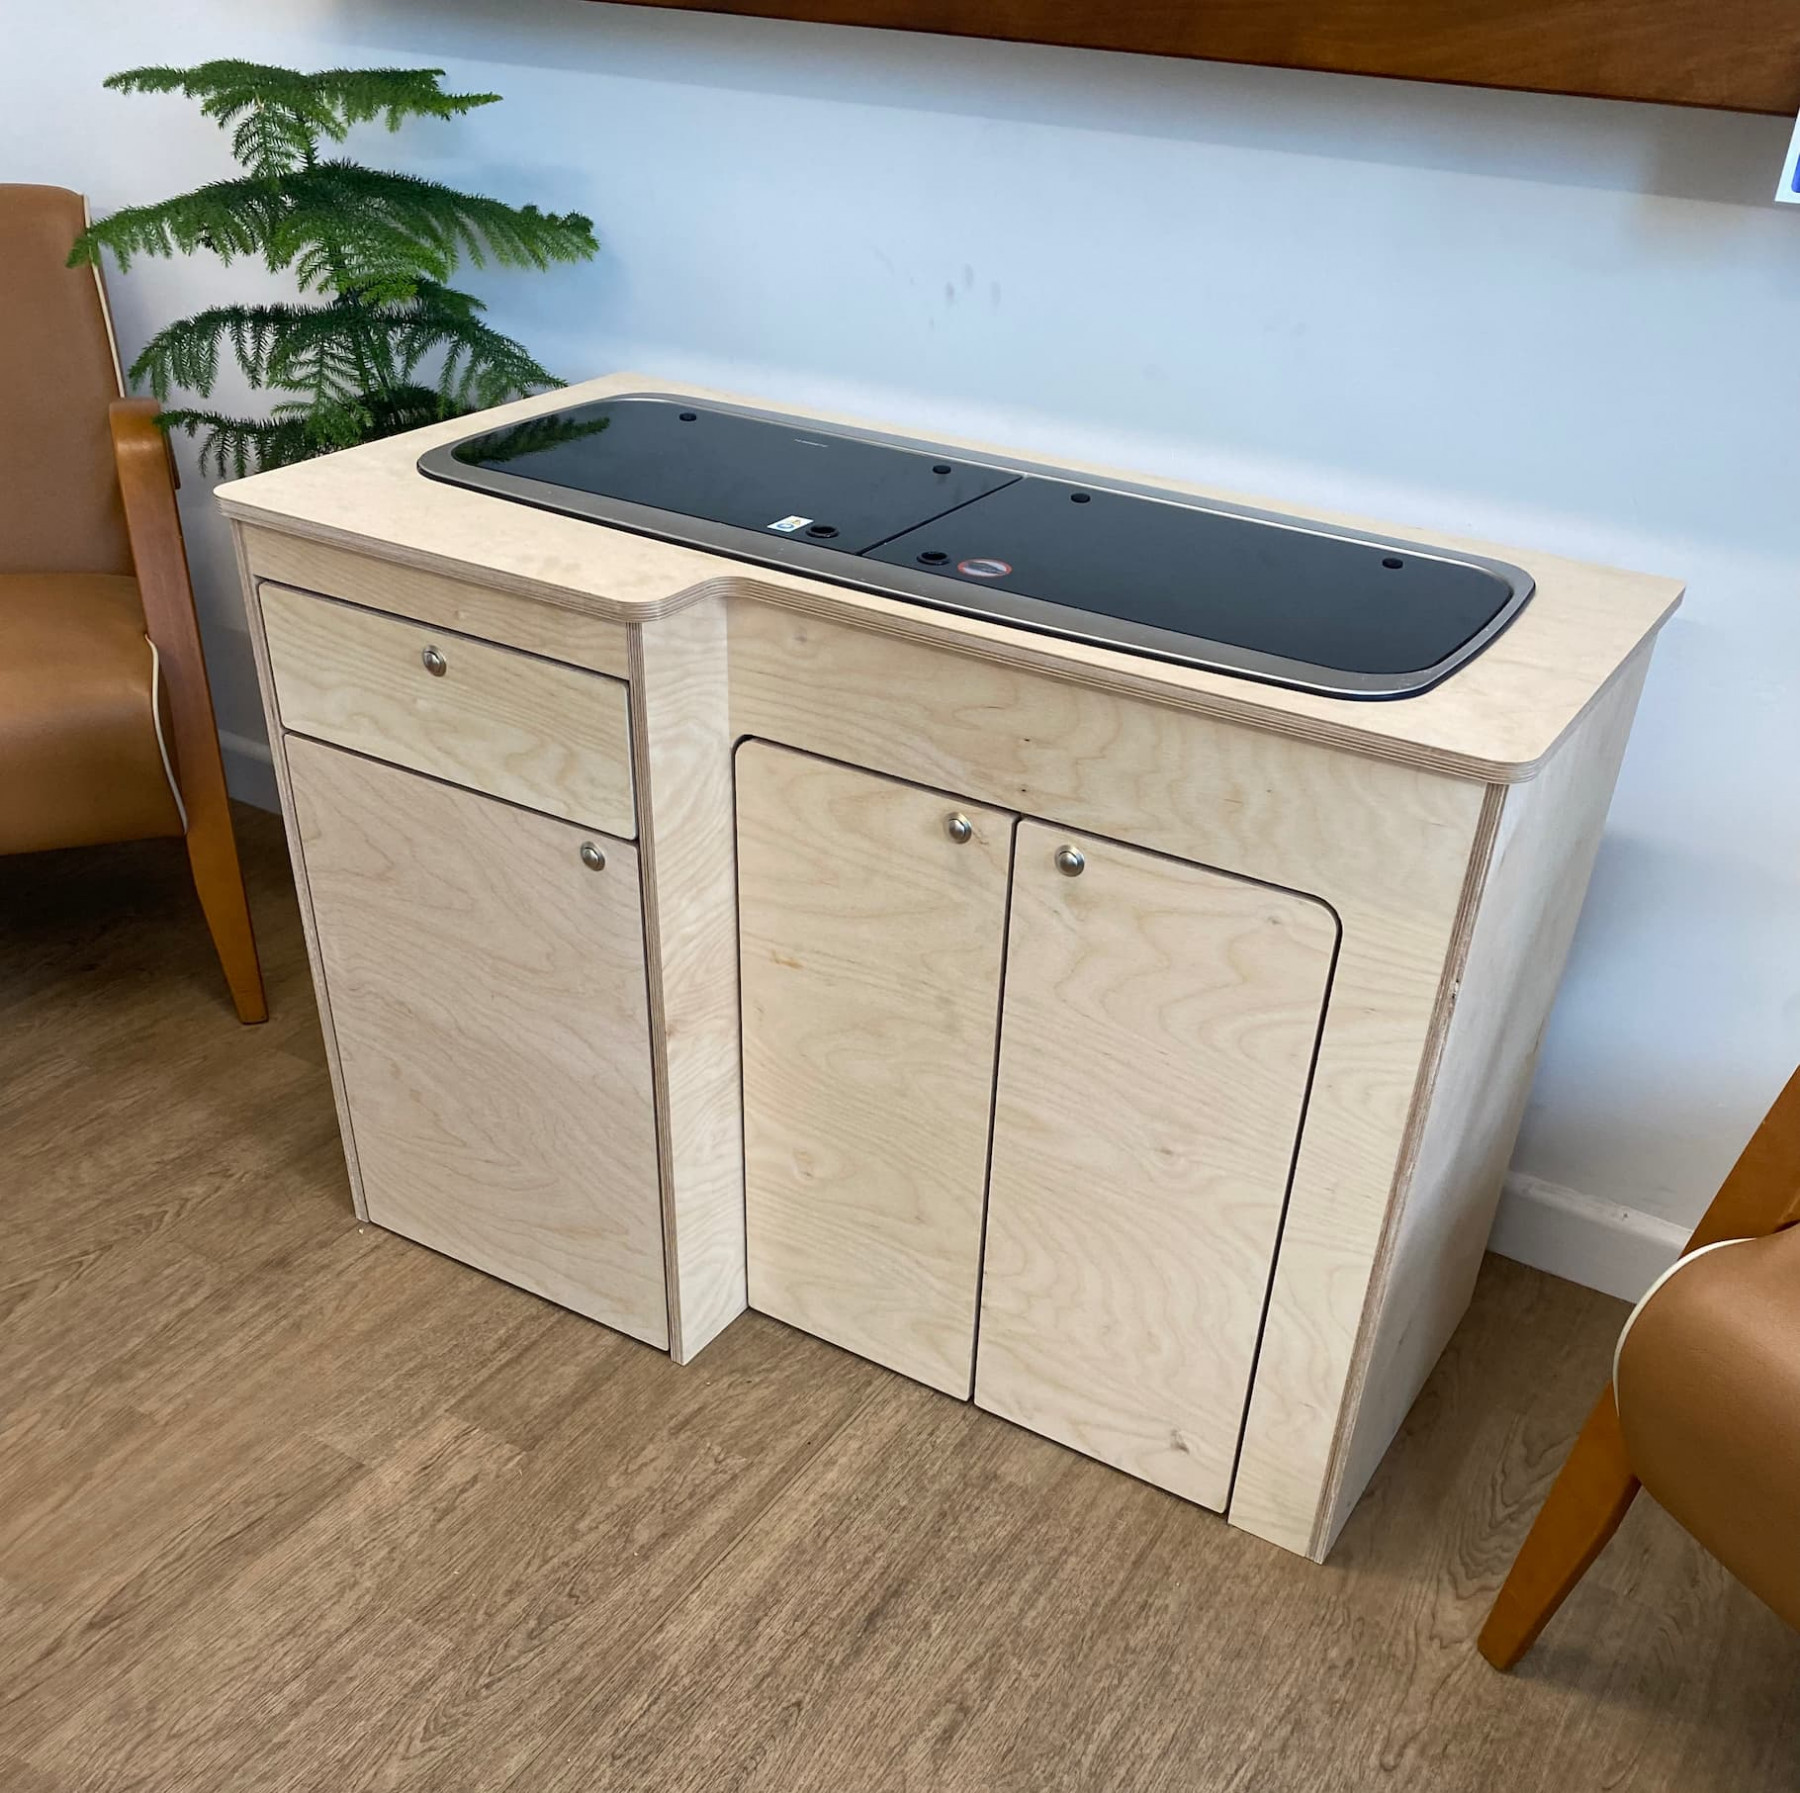 Pictured is a Plain Birch Carve Pod with the addition of the Smev RH 9222 sink